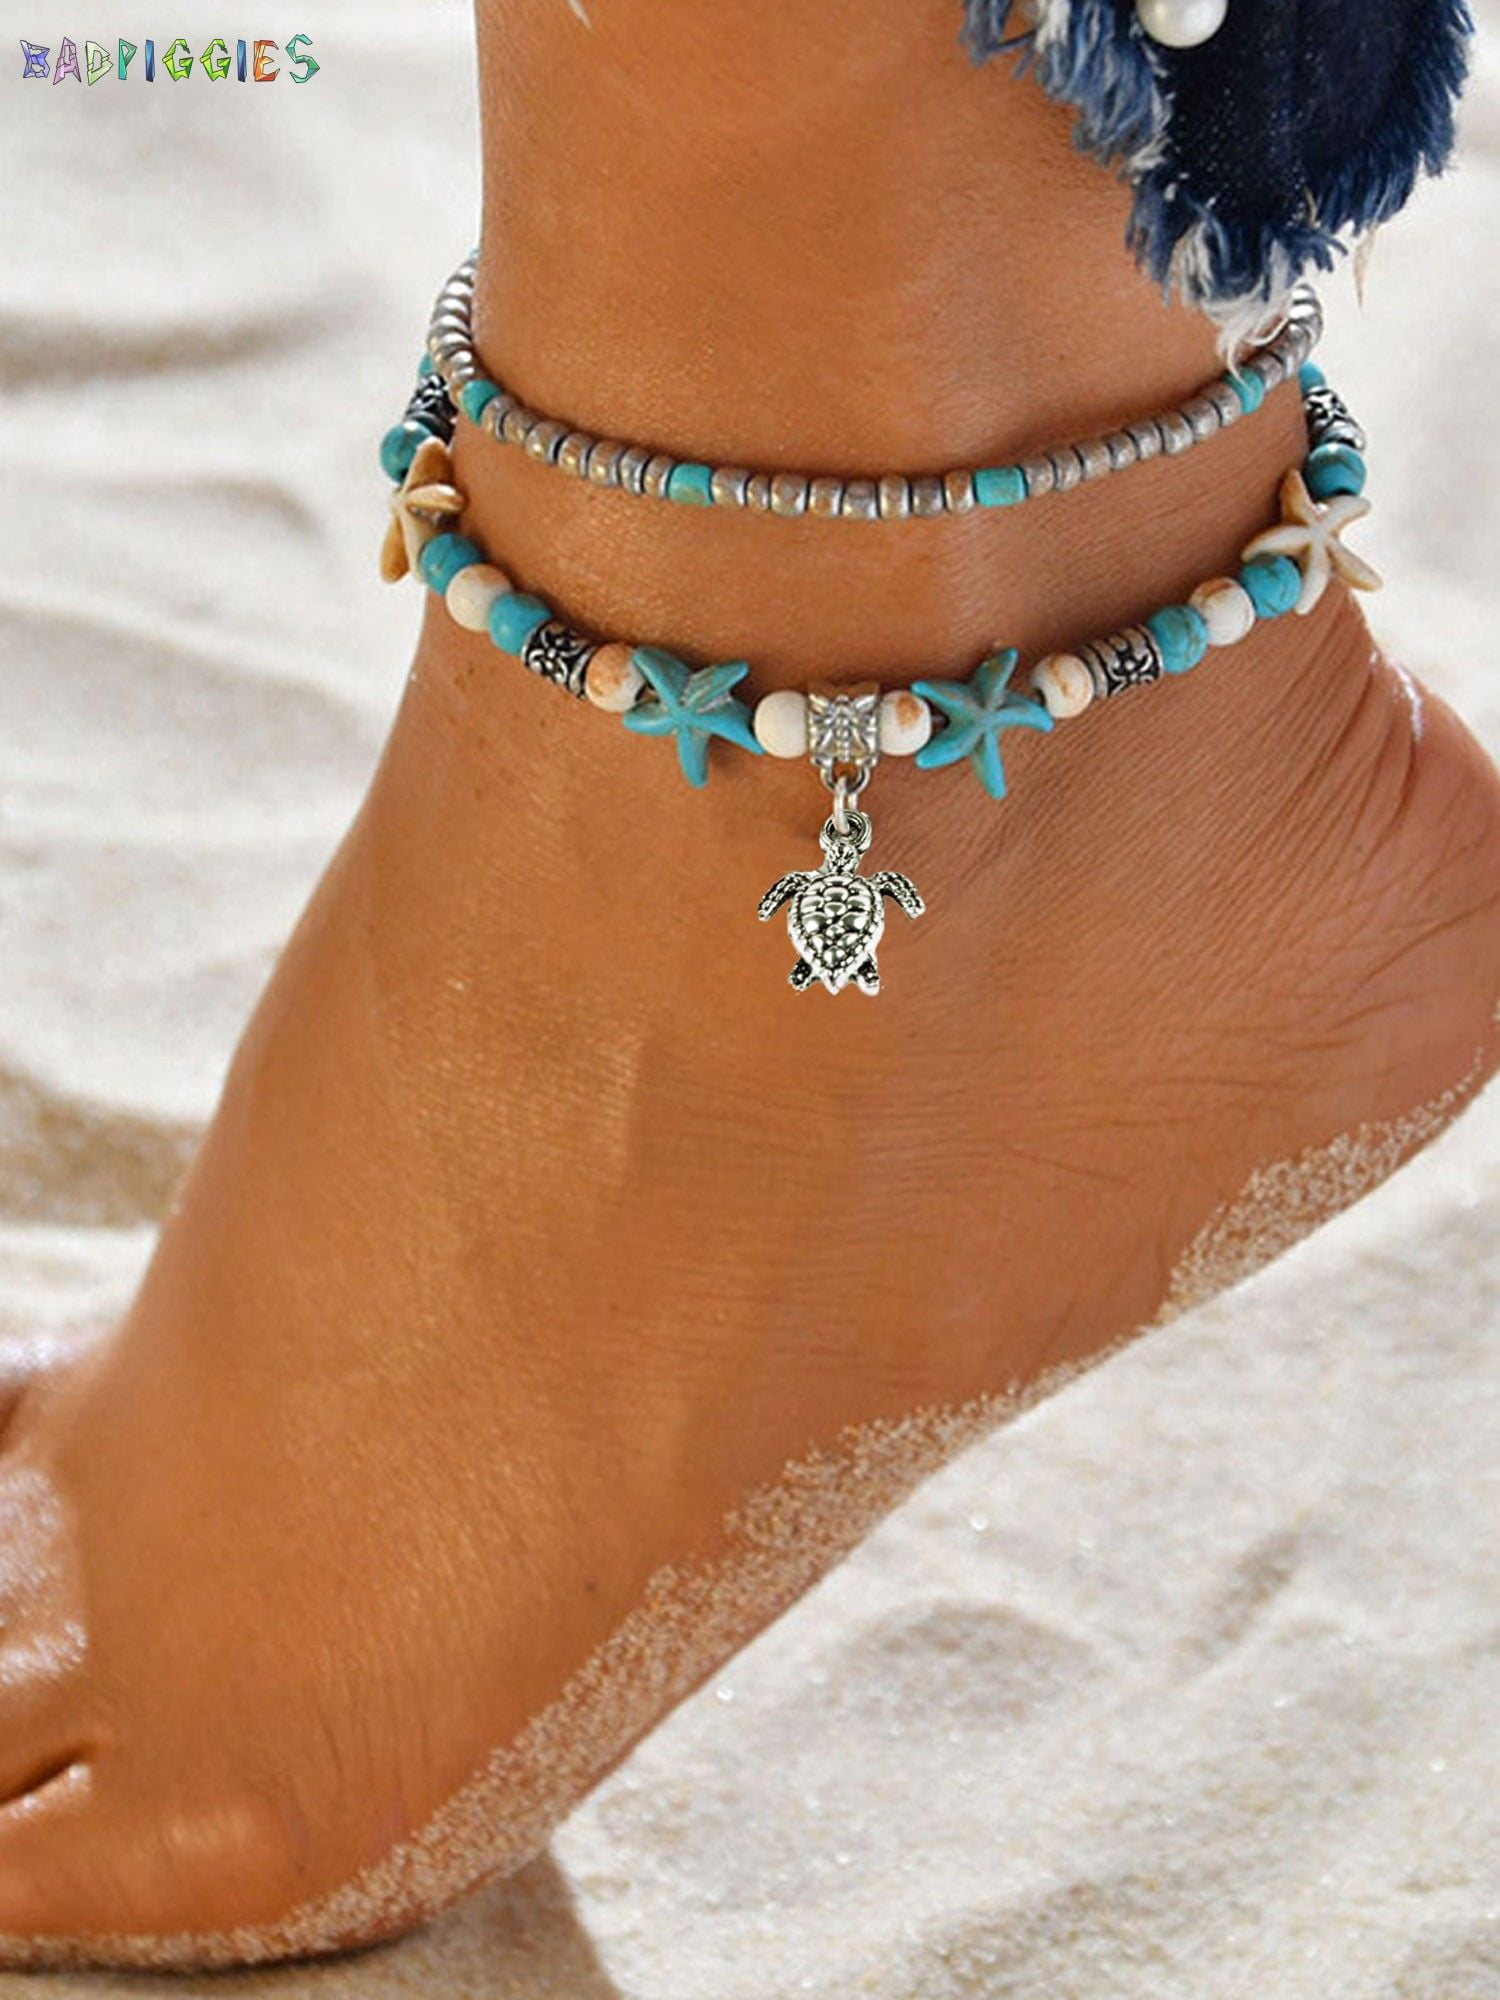 9 Fantastic Indian Foot Anklets For Women In Different Styles | Styles At  Life